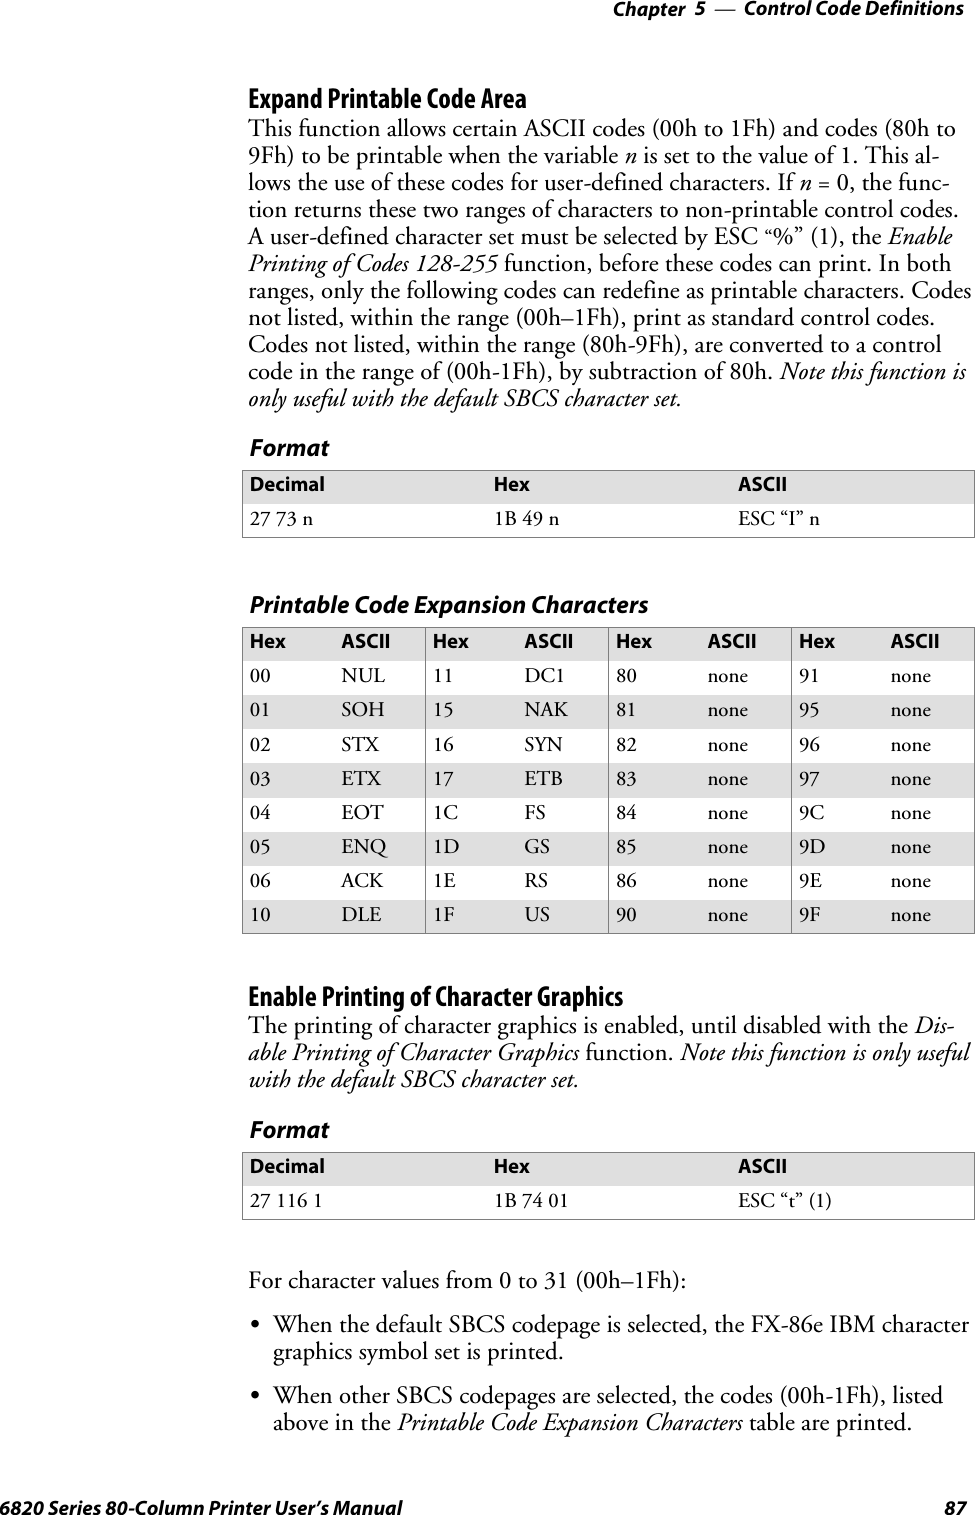 Control Code Definitions—Chapter 5876820 Series 80-Column Printer User’s ManualExpand Printable Code AreaThis function allows certain ASCII codes (00h to 1Fh) and codes (80h to9Fh) to be printable when the variable nis set to the value of 1. This al-lows the use of these codes for user-defined characters. If n= 0, the func-tion returns these two ranges of characters to non-printable control codes.A user-defined character set must be selected by ESC“%” (1), the EnablePrinting of Codes 128-255 function, before these codes can print. In bothranges, only the following codes can redefine as printable characters. Codesnot listed, within the range (00h–1Fh), print as standard control codes.Codes not listed, within the range (80h-9Fh), are converted to a controlcode in the range of (00h-1Fh), by subtraction of 80h. Note this function isonly useful with the default SBCS character set.FormatDecimal Hex ASCII27 73 n 1B 49 n ESC “I” nPrintable Code Expansion CharactersHex ASCII Hex ASCII Hex ASCII Hex ASCII00 NUL 11 DC1 80 none 91 none01 SOH 15 NAK 81 none 95 none02 STX 16 SYN 82 none 96 none03 ETX 17 ETB 83 none 97 none04 EOT 1C FS 84 none 9C none05 ENQ 1D GS 85 none 9D none06 ACK 1E RS 86 none 9E none10 DLE 1F US 90 none 9F noneEnable Printing of Character GraphicsThe printing of character graphics is enabled, until disabled with the Dis-able Printing of Character Graphics function. Note this function is only usefulwith the default SBCS character set.FormatDecimal Hex ASCII27 116 1 1B 74 01 ESC “t” (1)For character values from 0 to 31 (00h–1Fh):SWhen the default SBCS codepage is selected, the FX-86e IBM charactergraphics symbol set is printed.SWhen other SBCS codepages are selected, the codes (00h-1Fh), listedabove in the Printable Code Expansion Characters table are printed.